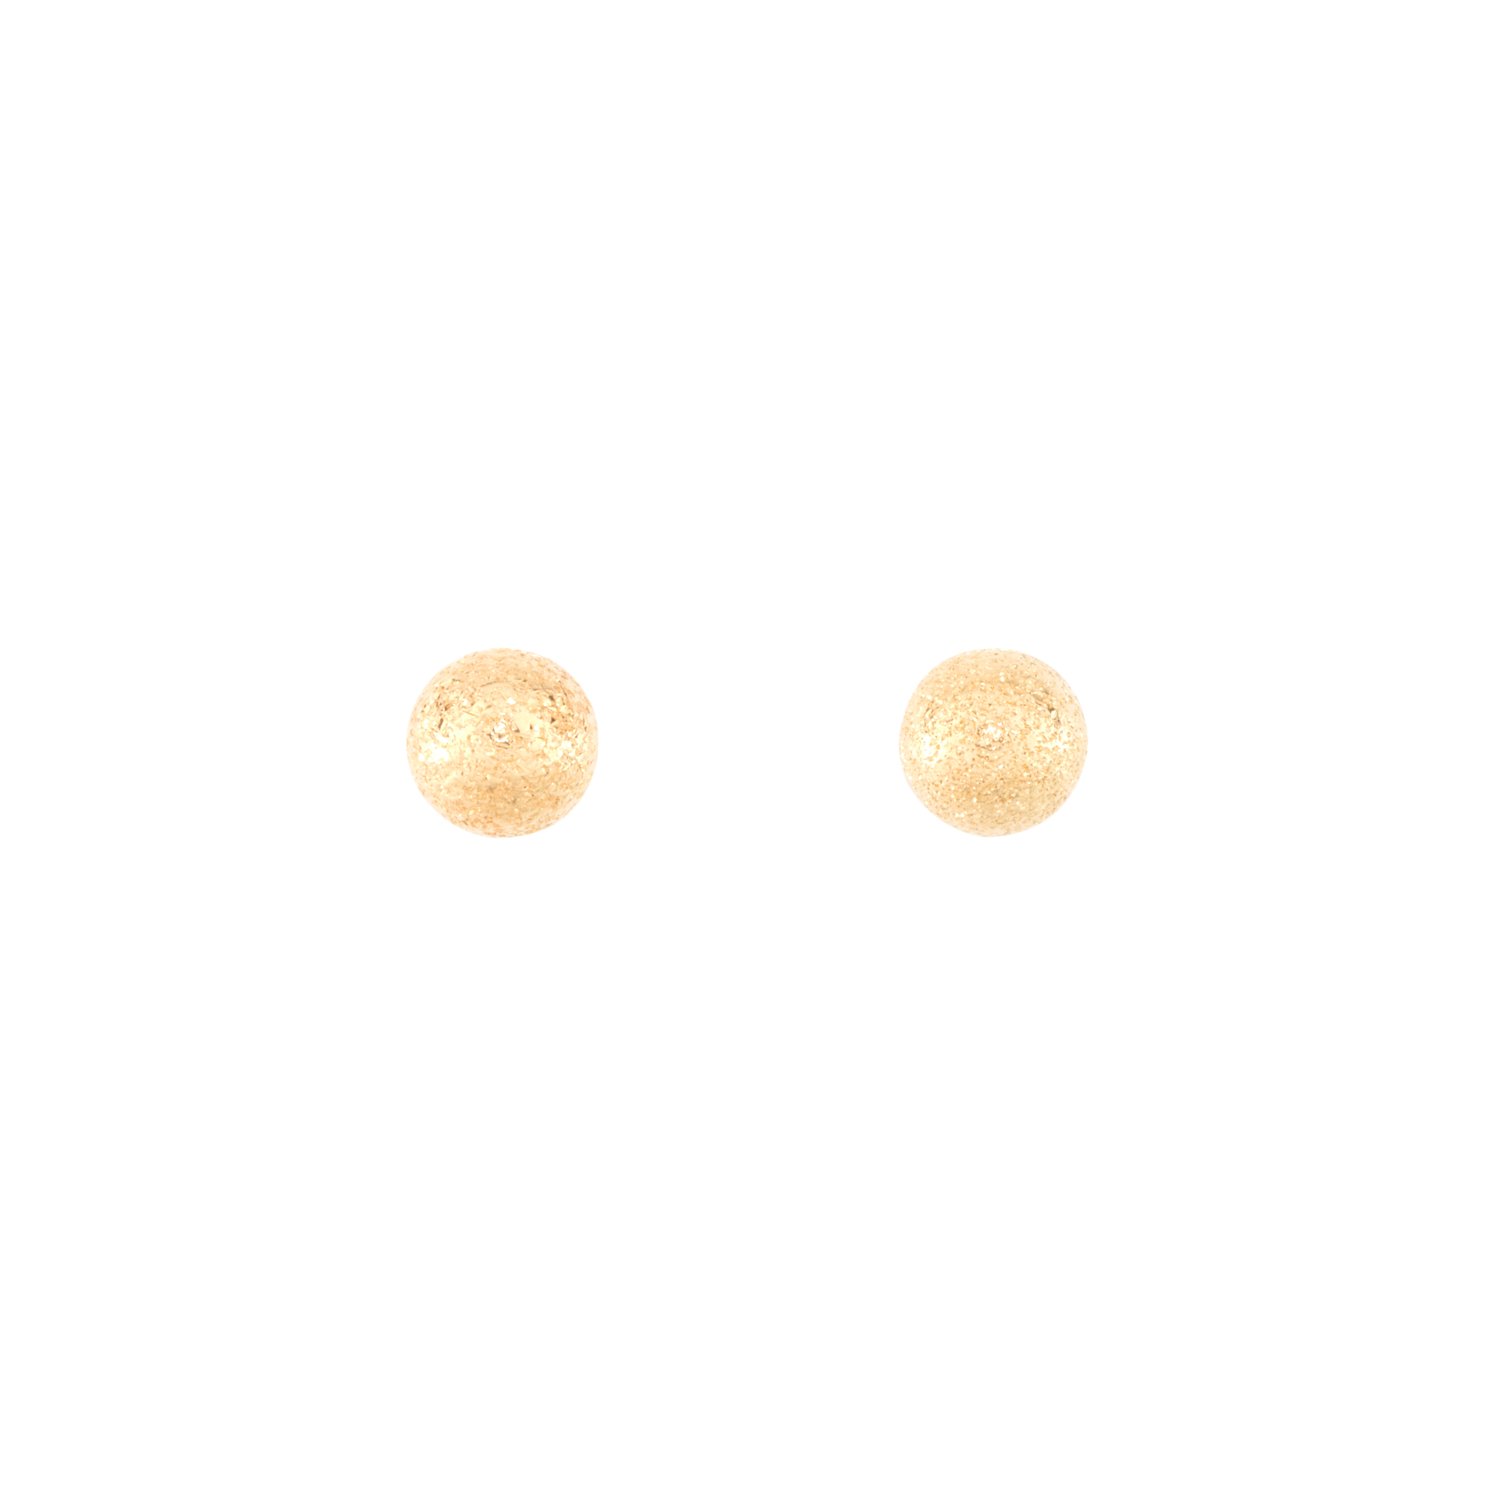 Catbird "Stardust" studs in 14k gold, $42 for a single at Catbird